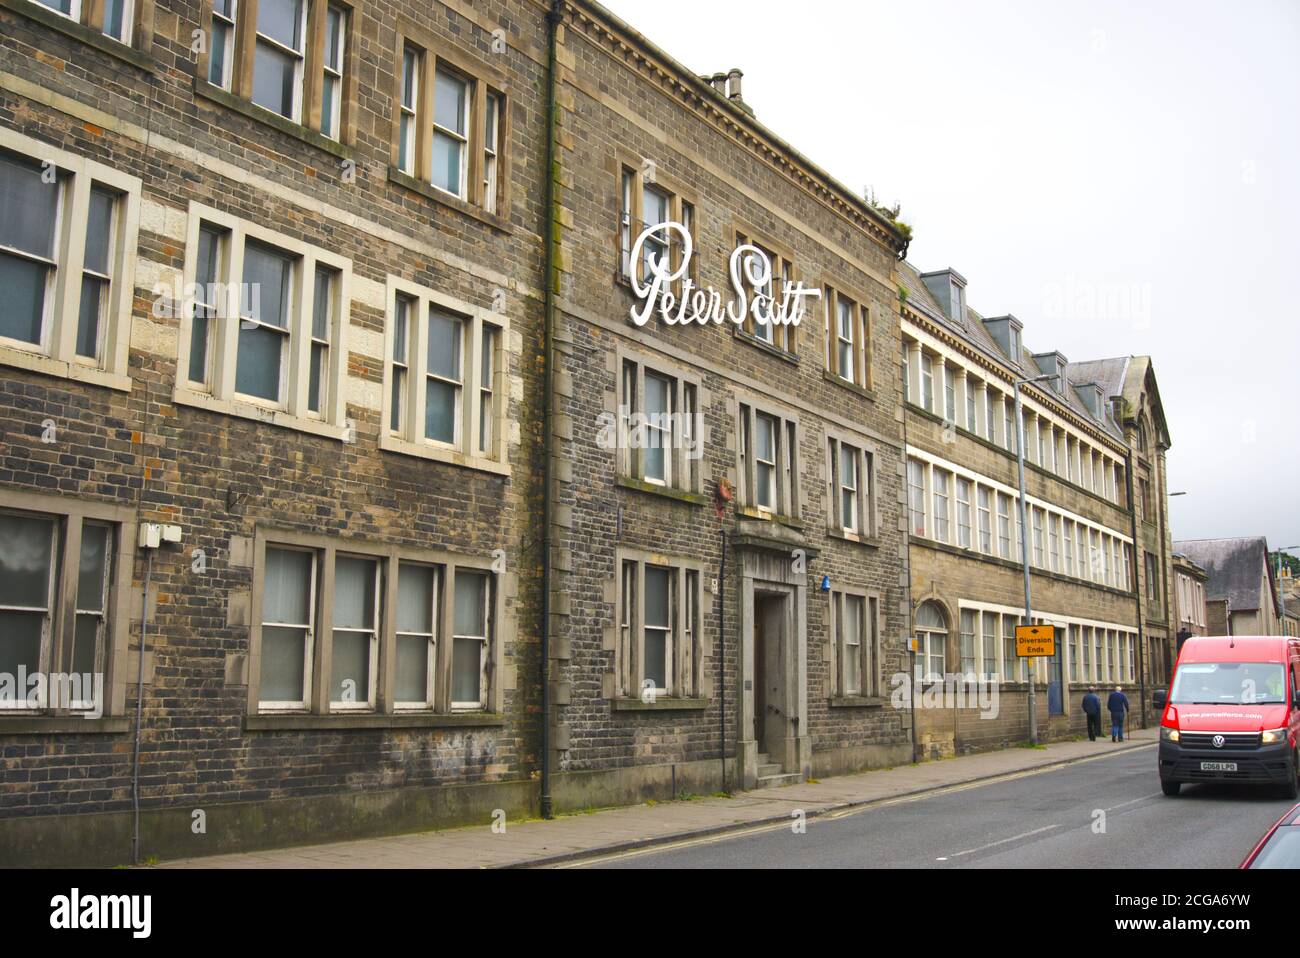 Former Peter Scott knitwear factory (active 1878 to 2016) in Hawick, Roxburghshire, Scottish Borders, UK. Stock Photo